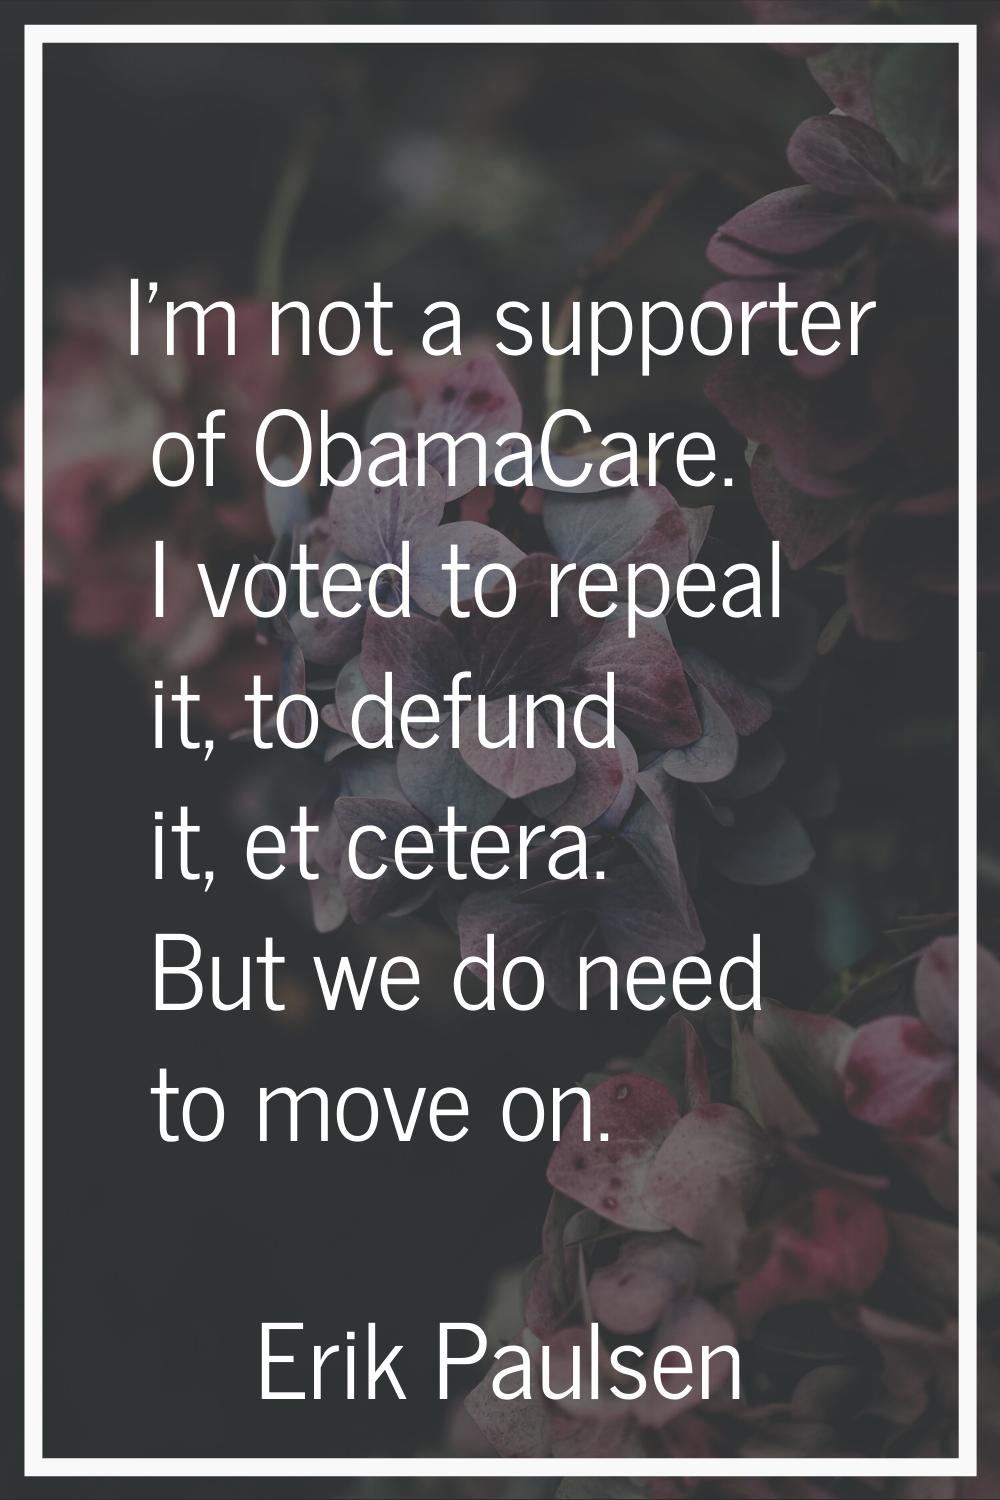 I'm not a supporter of ObamaCare. I voted to repeal it, to defund it, et cetera. But we do need to 